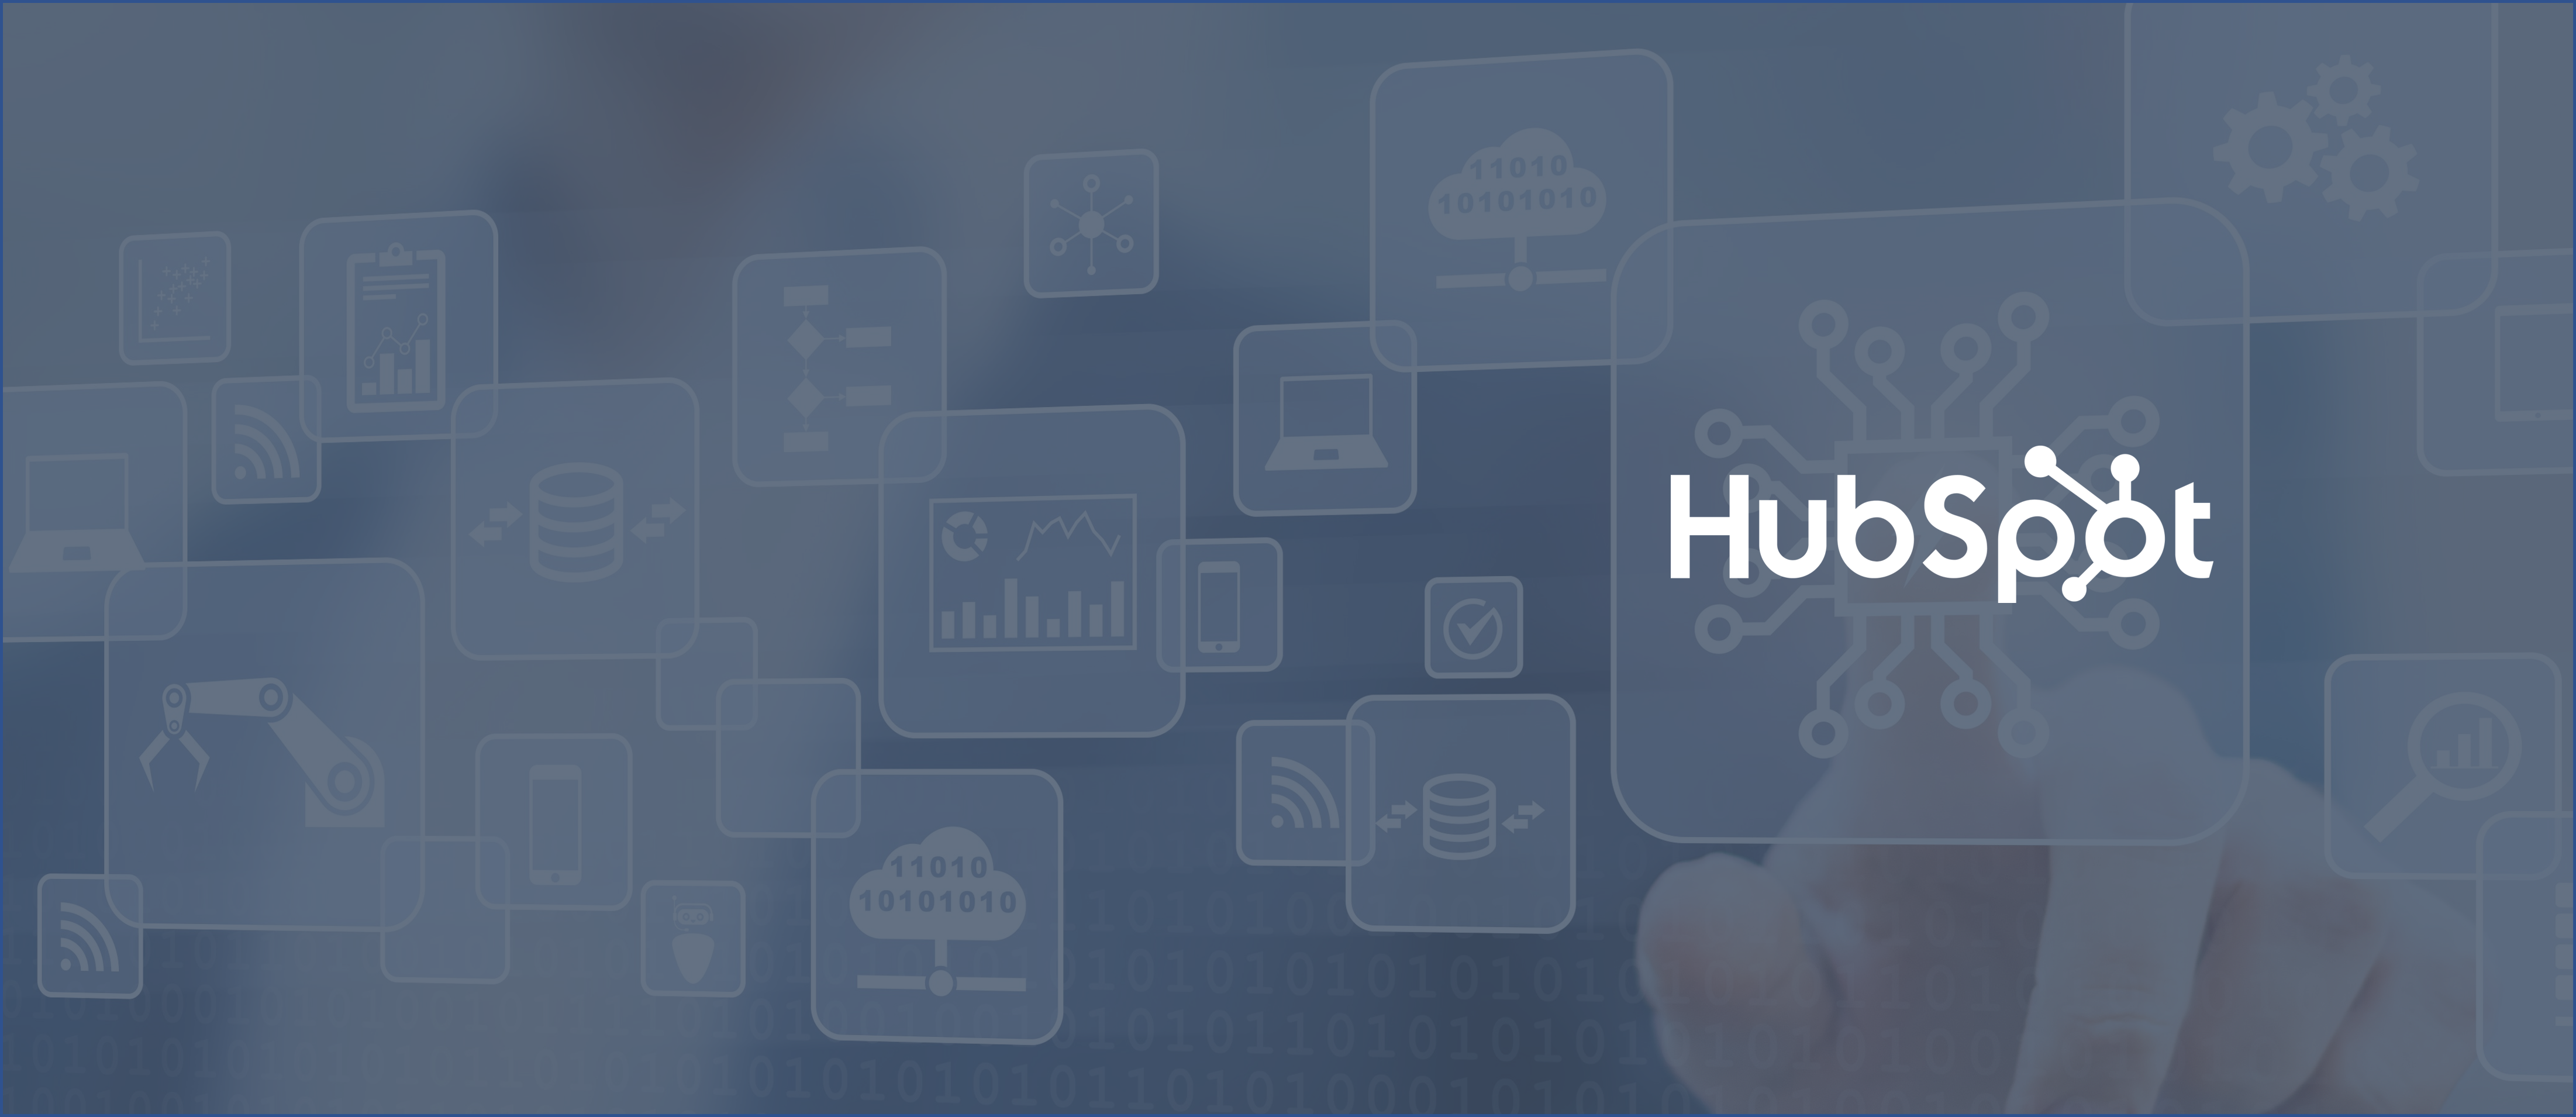 Why HubSpot for Associations?